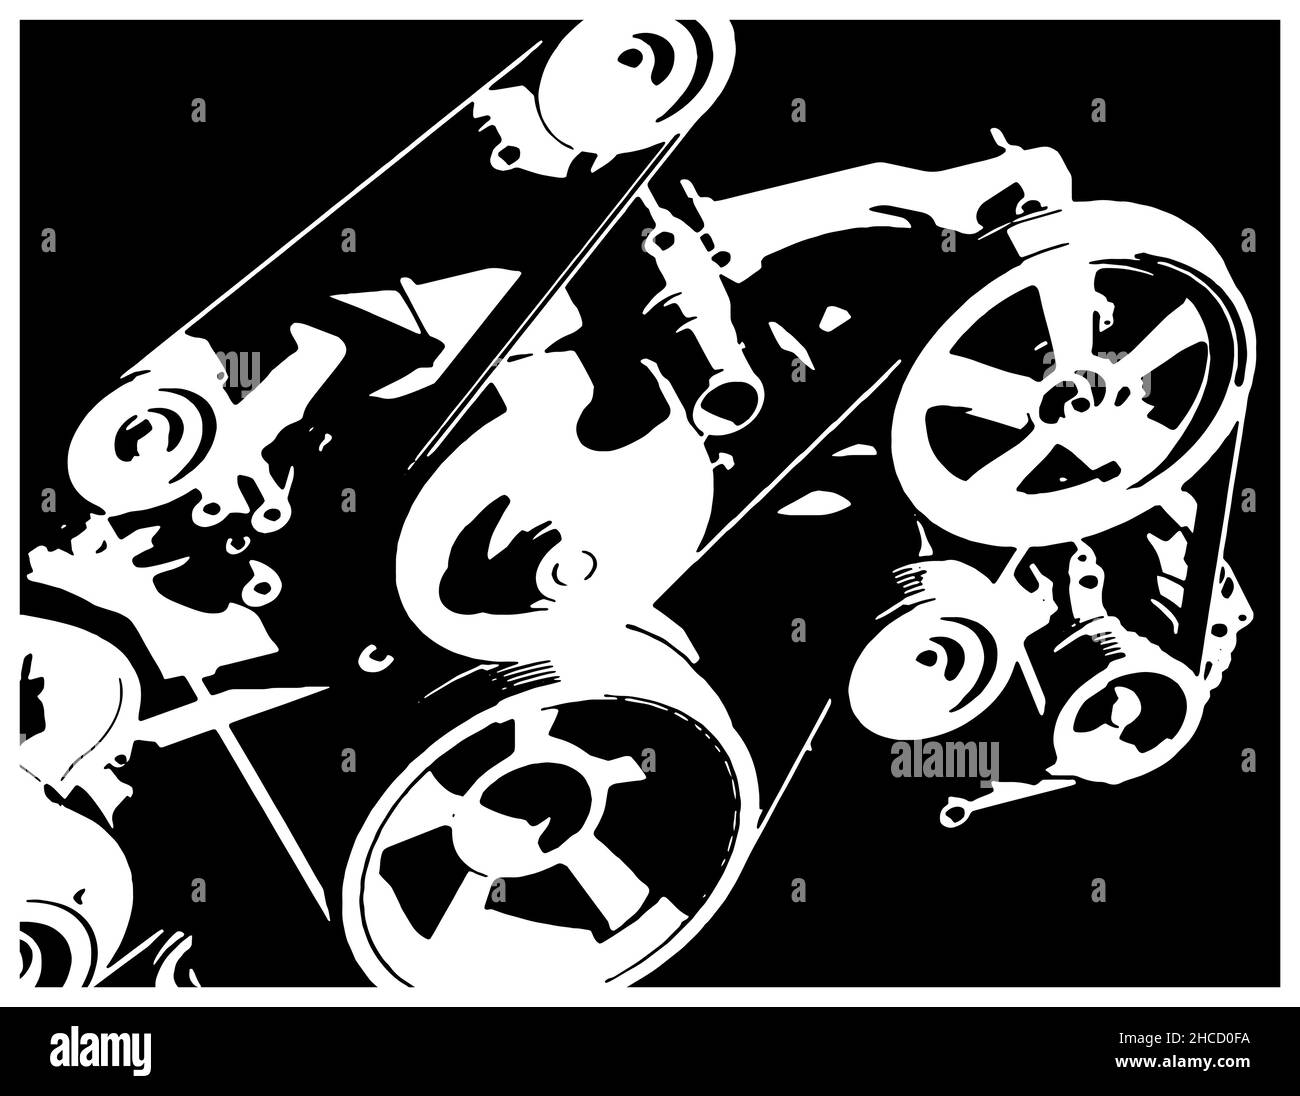 Stylized vector illustration of engine mechanisms with belt drives close up Stock Vector